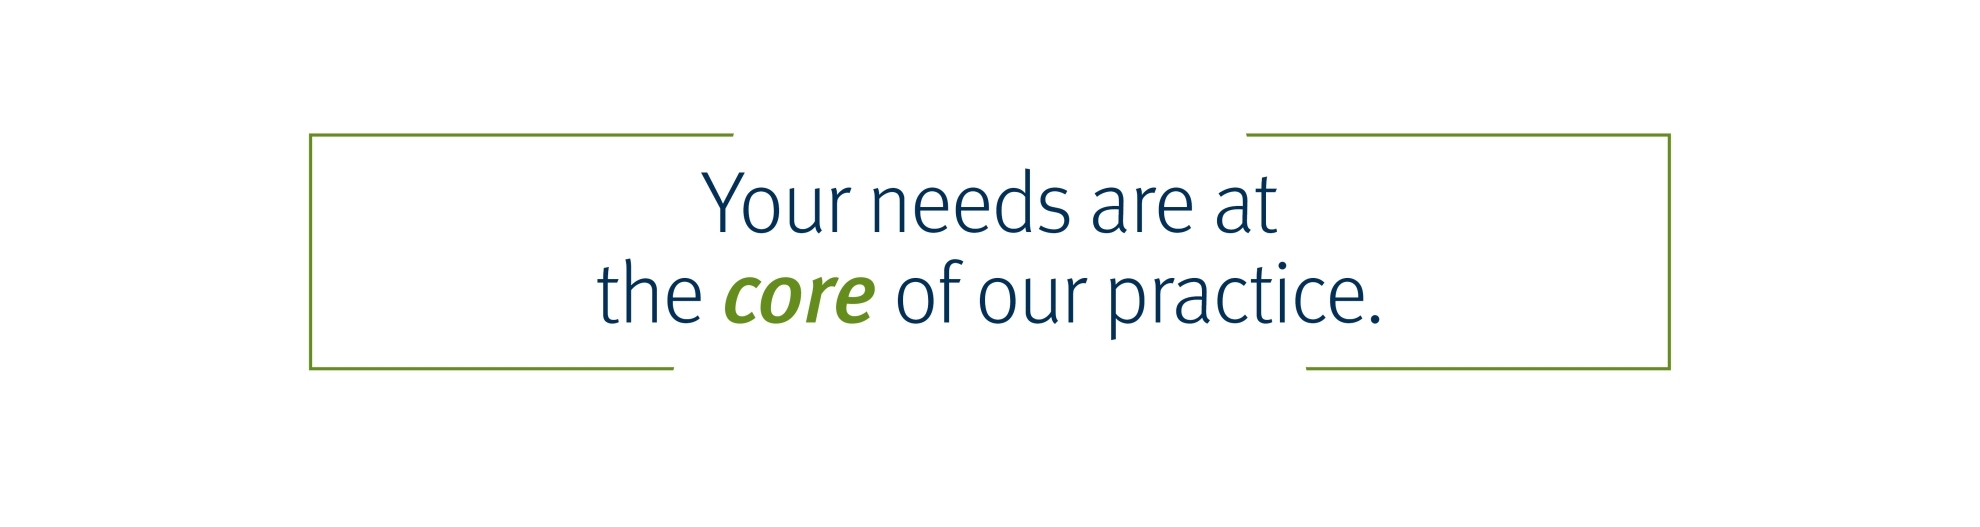 Your needs are at the core of our practice